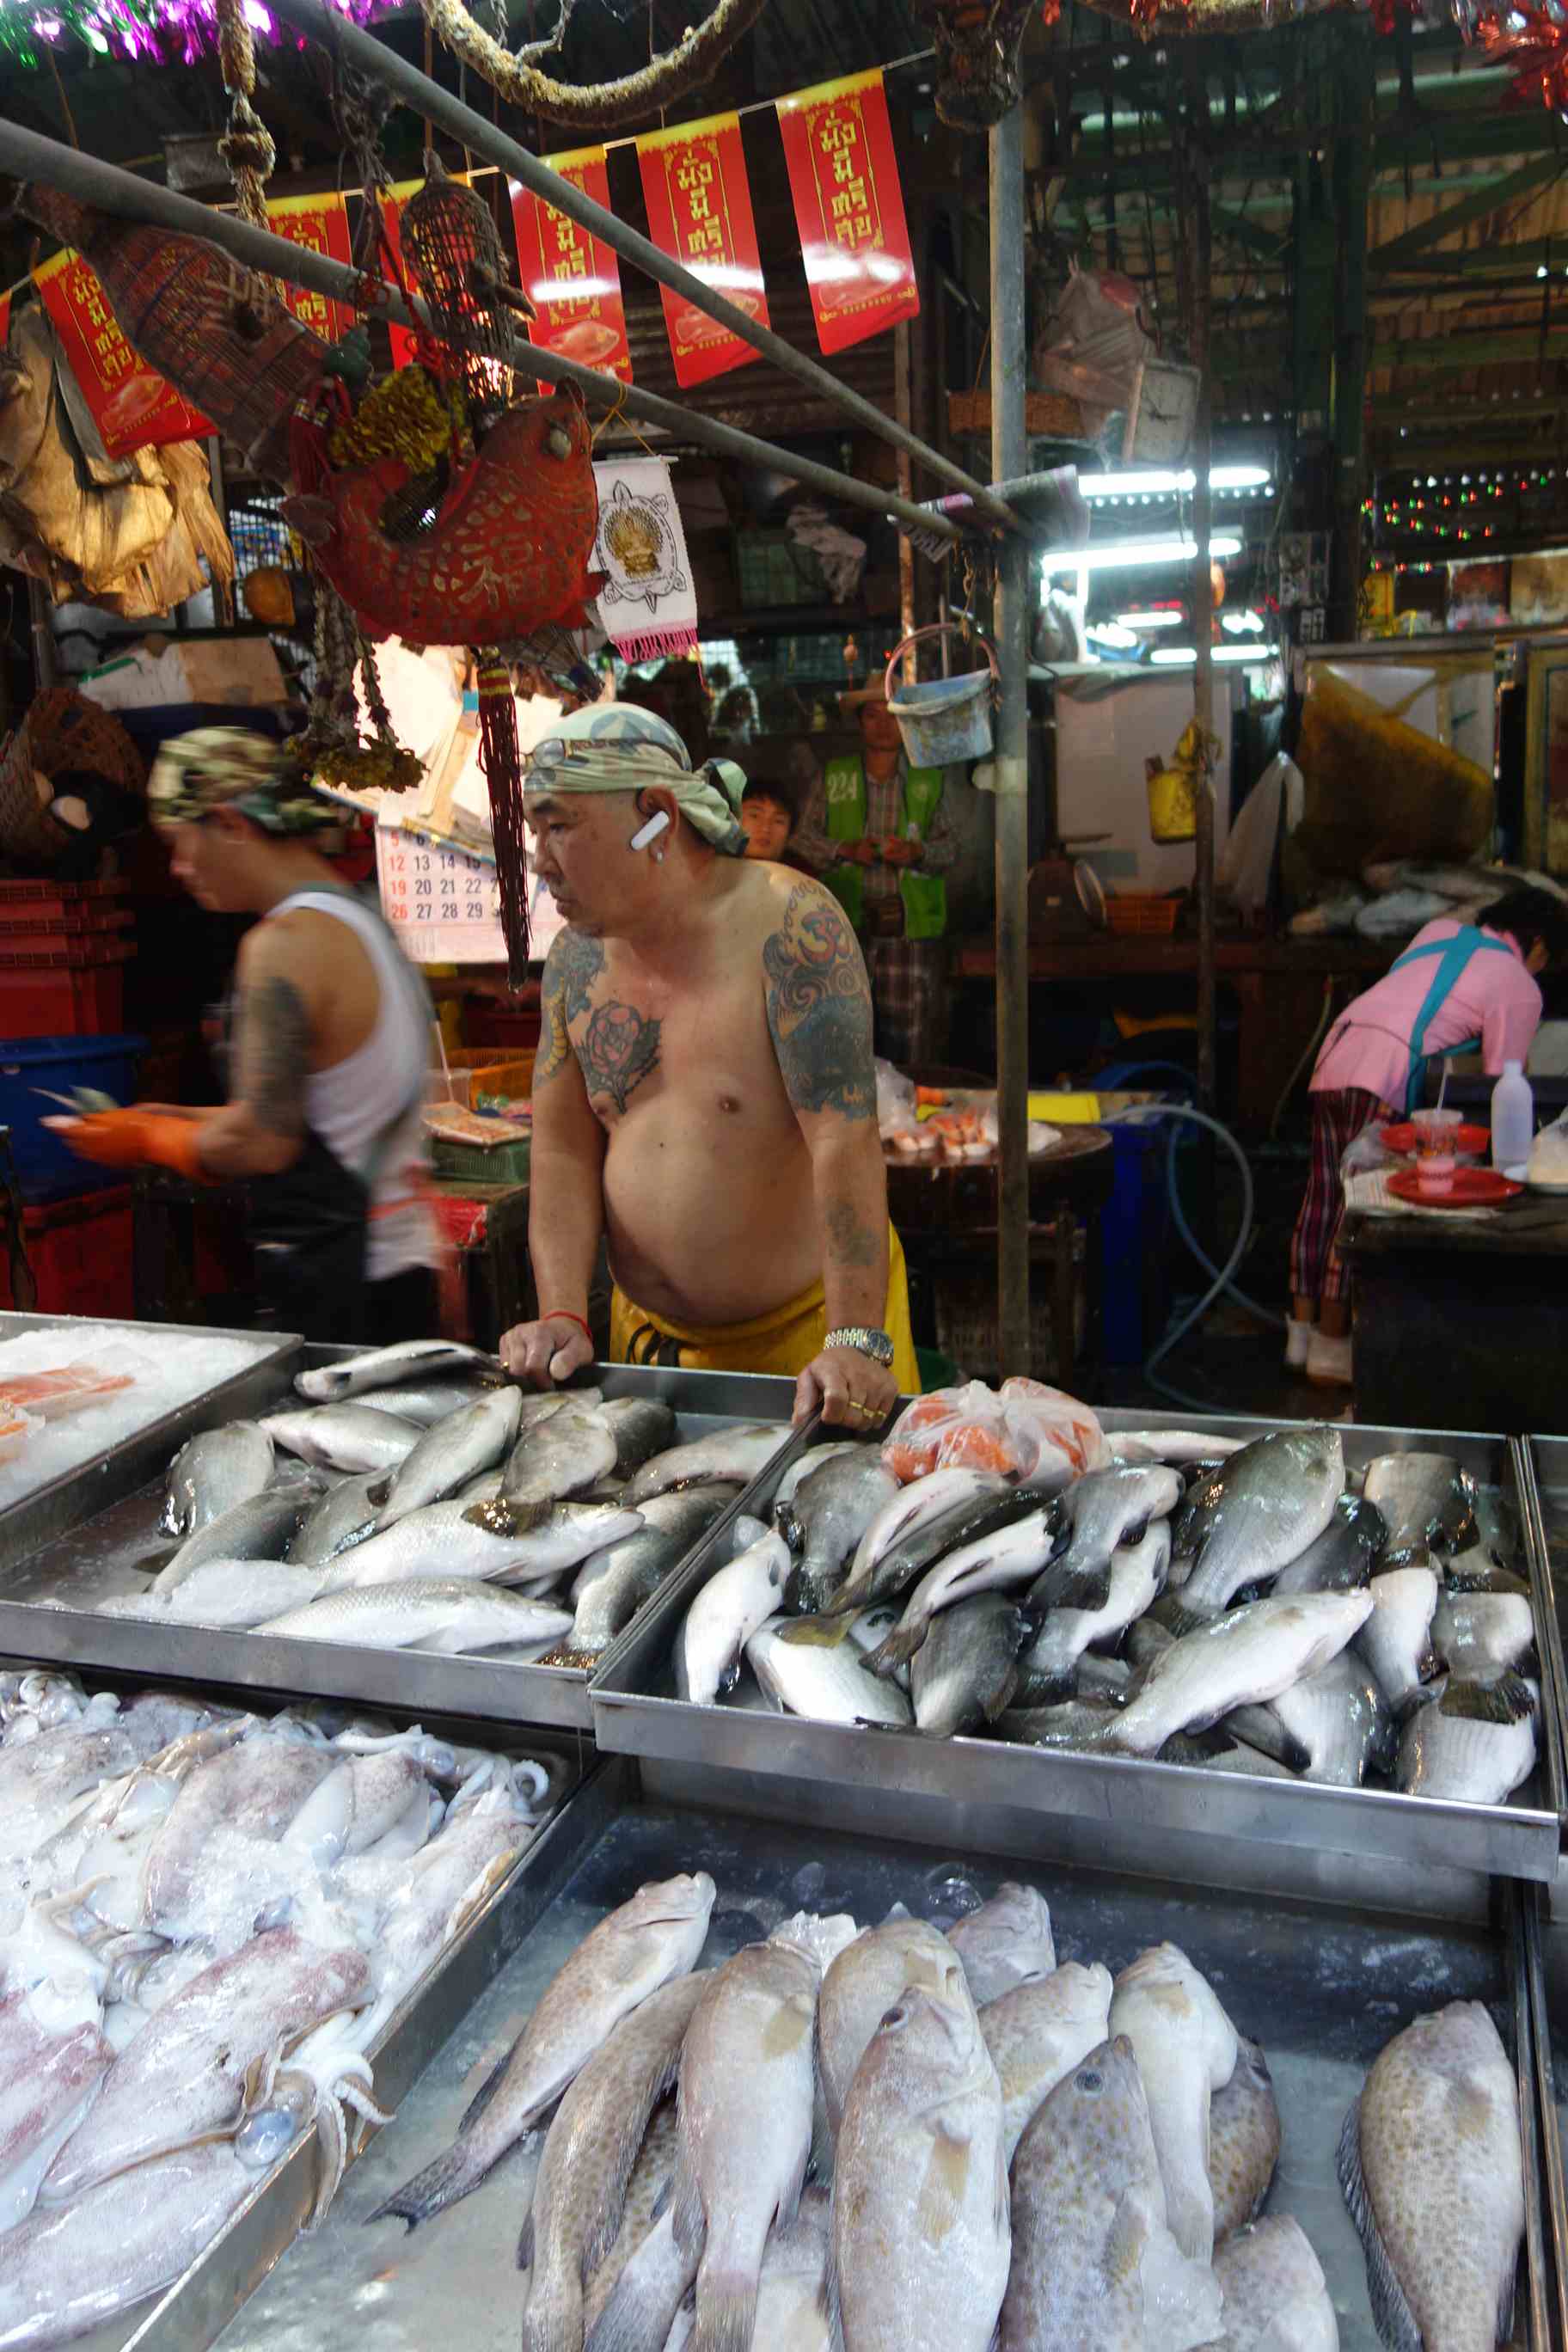 This was perhaps my favorite person in Thailand: shirtless fishmonger wearing a dorag and bluetooth